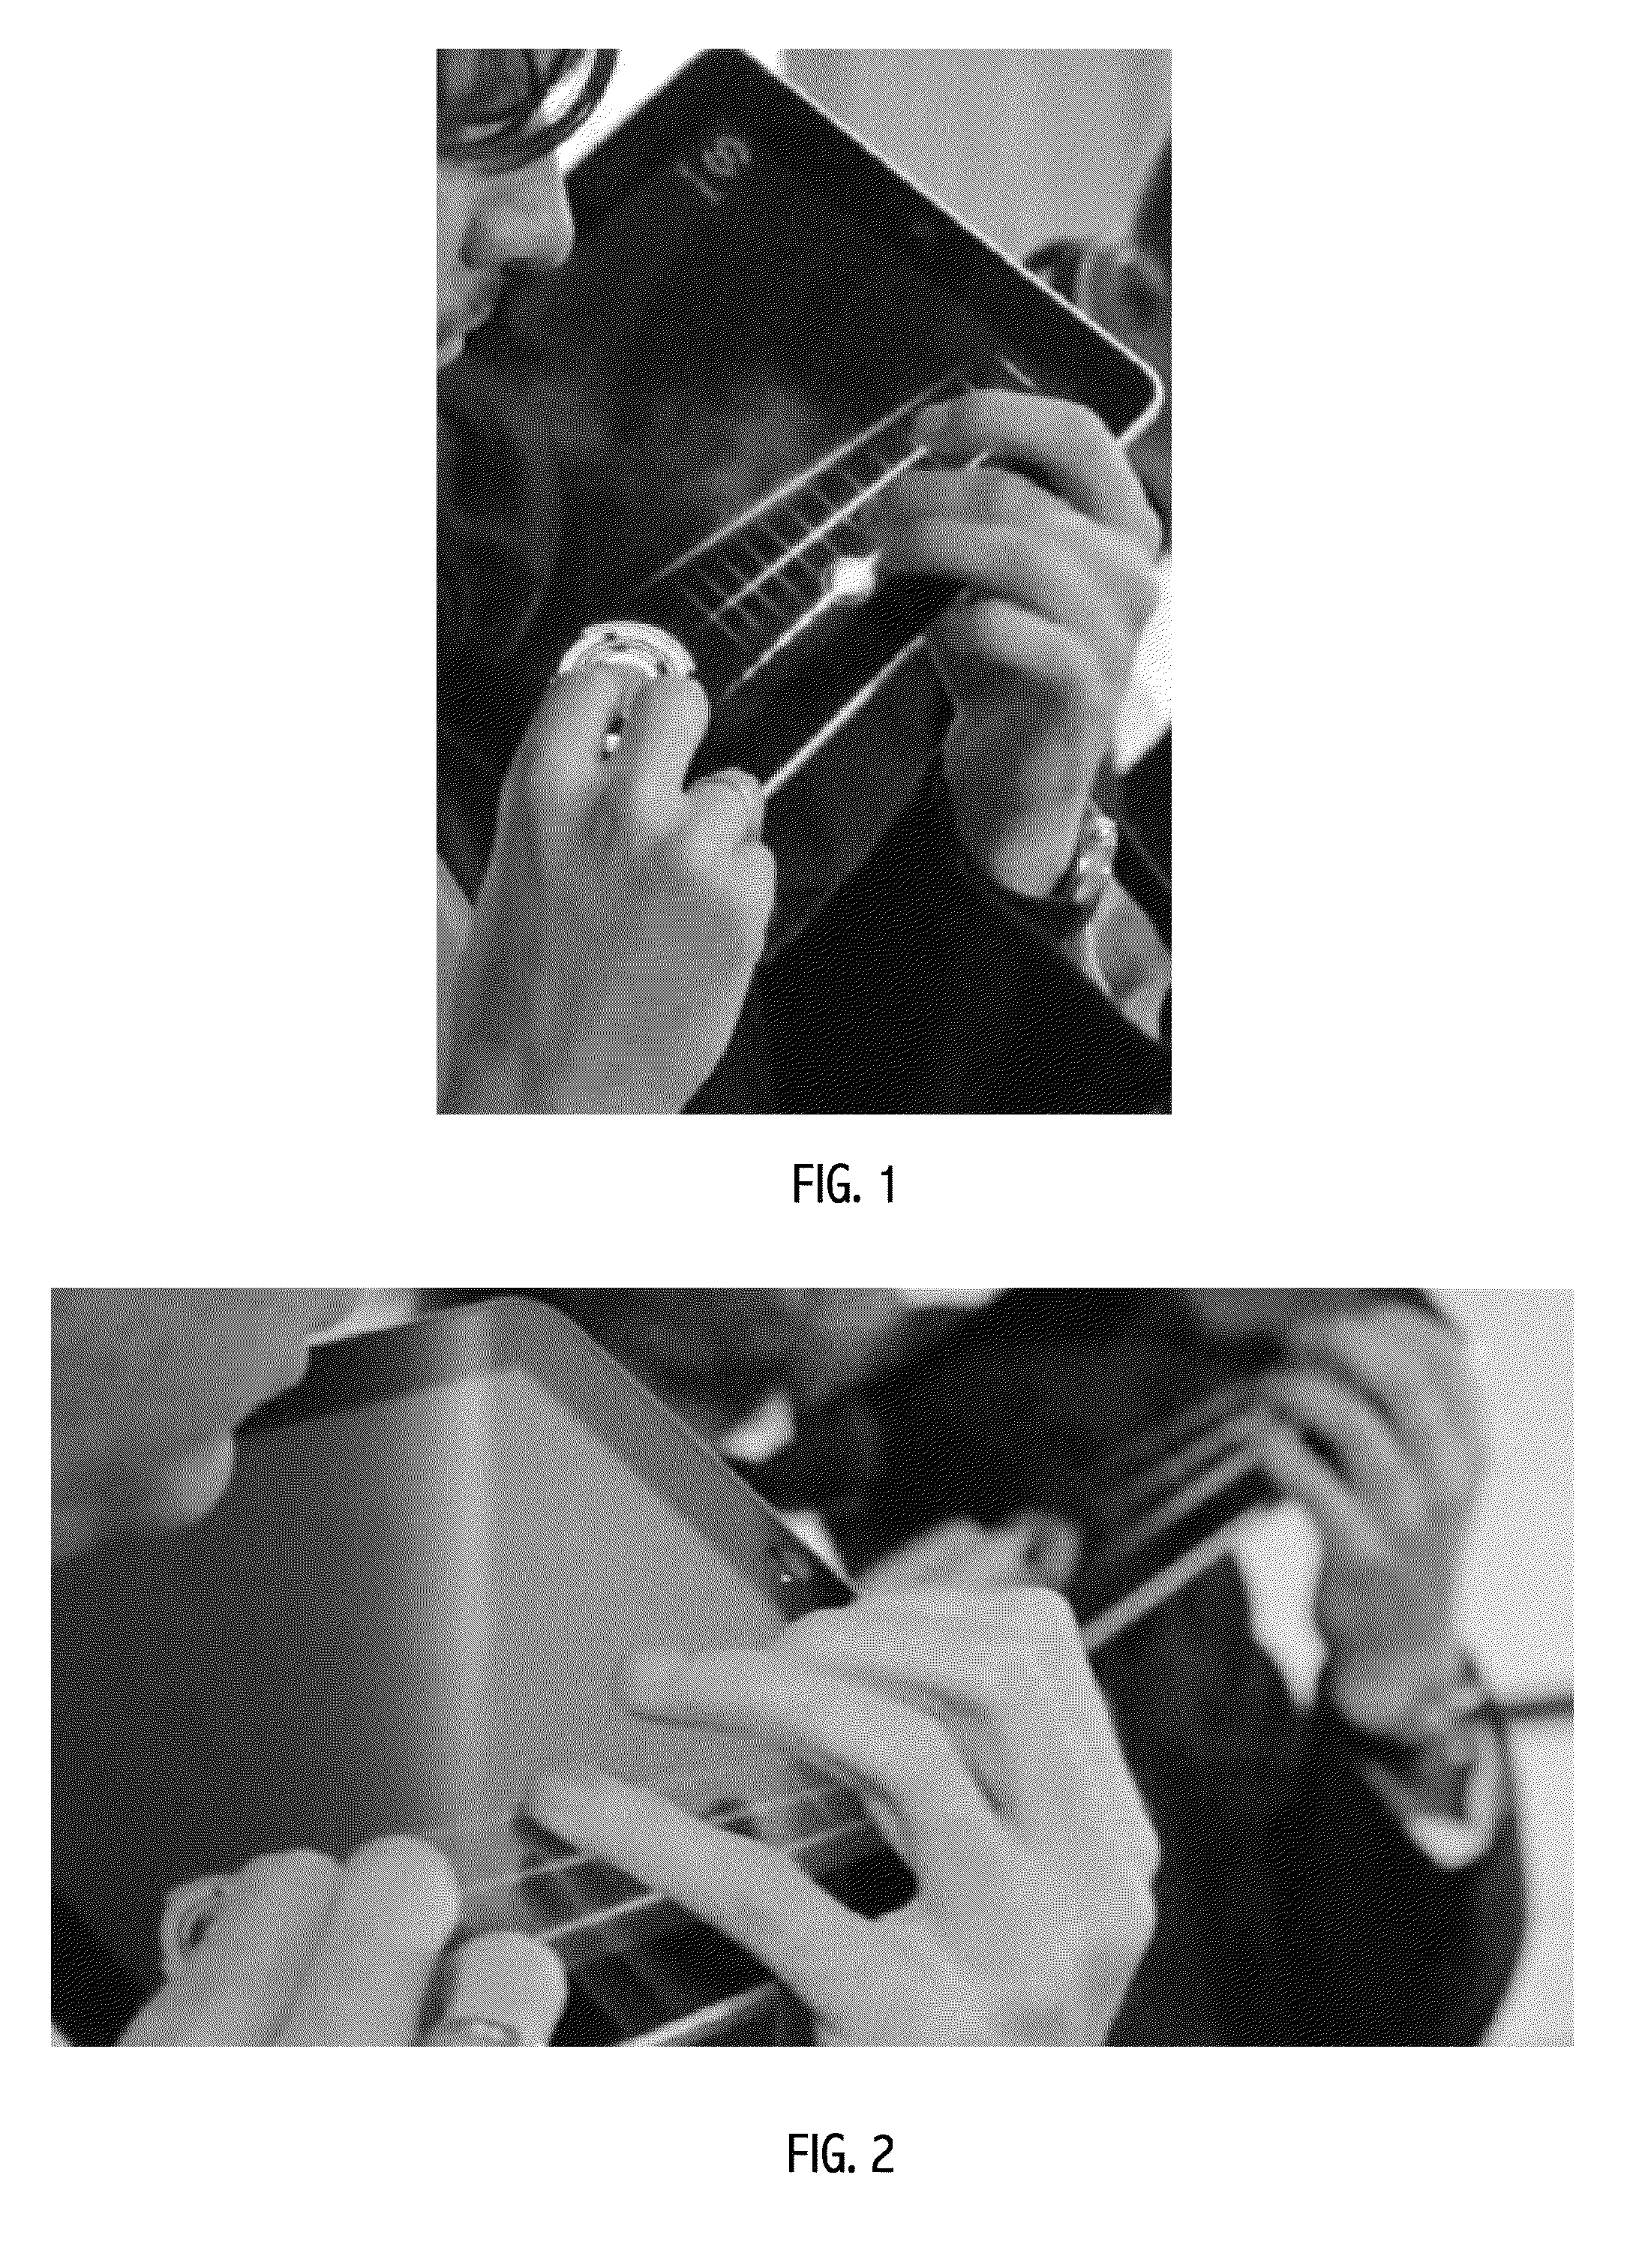 System and method for capture and rendering of performance on synthetic string instrument